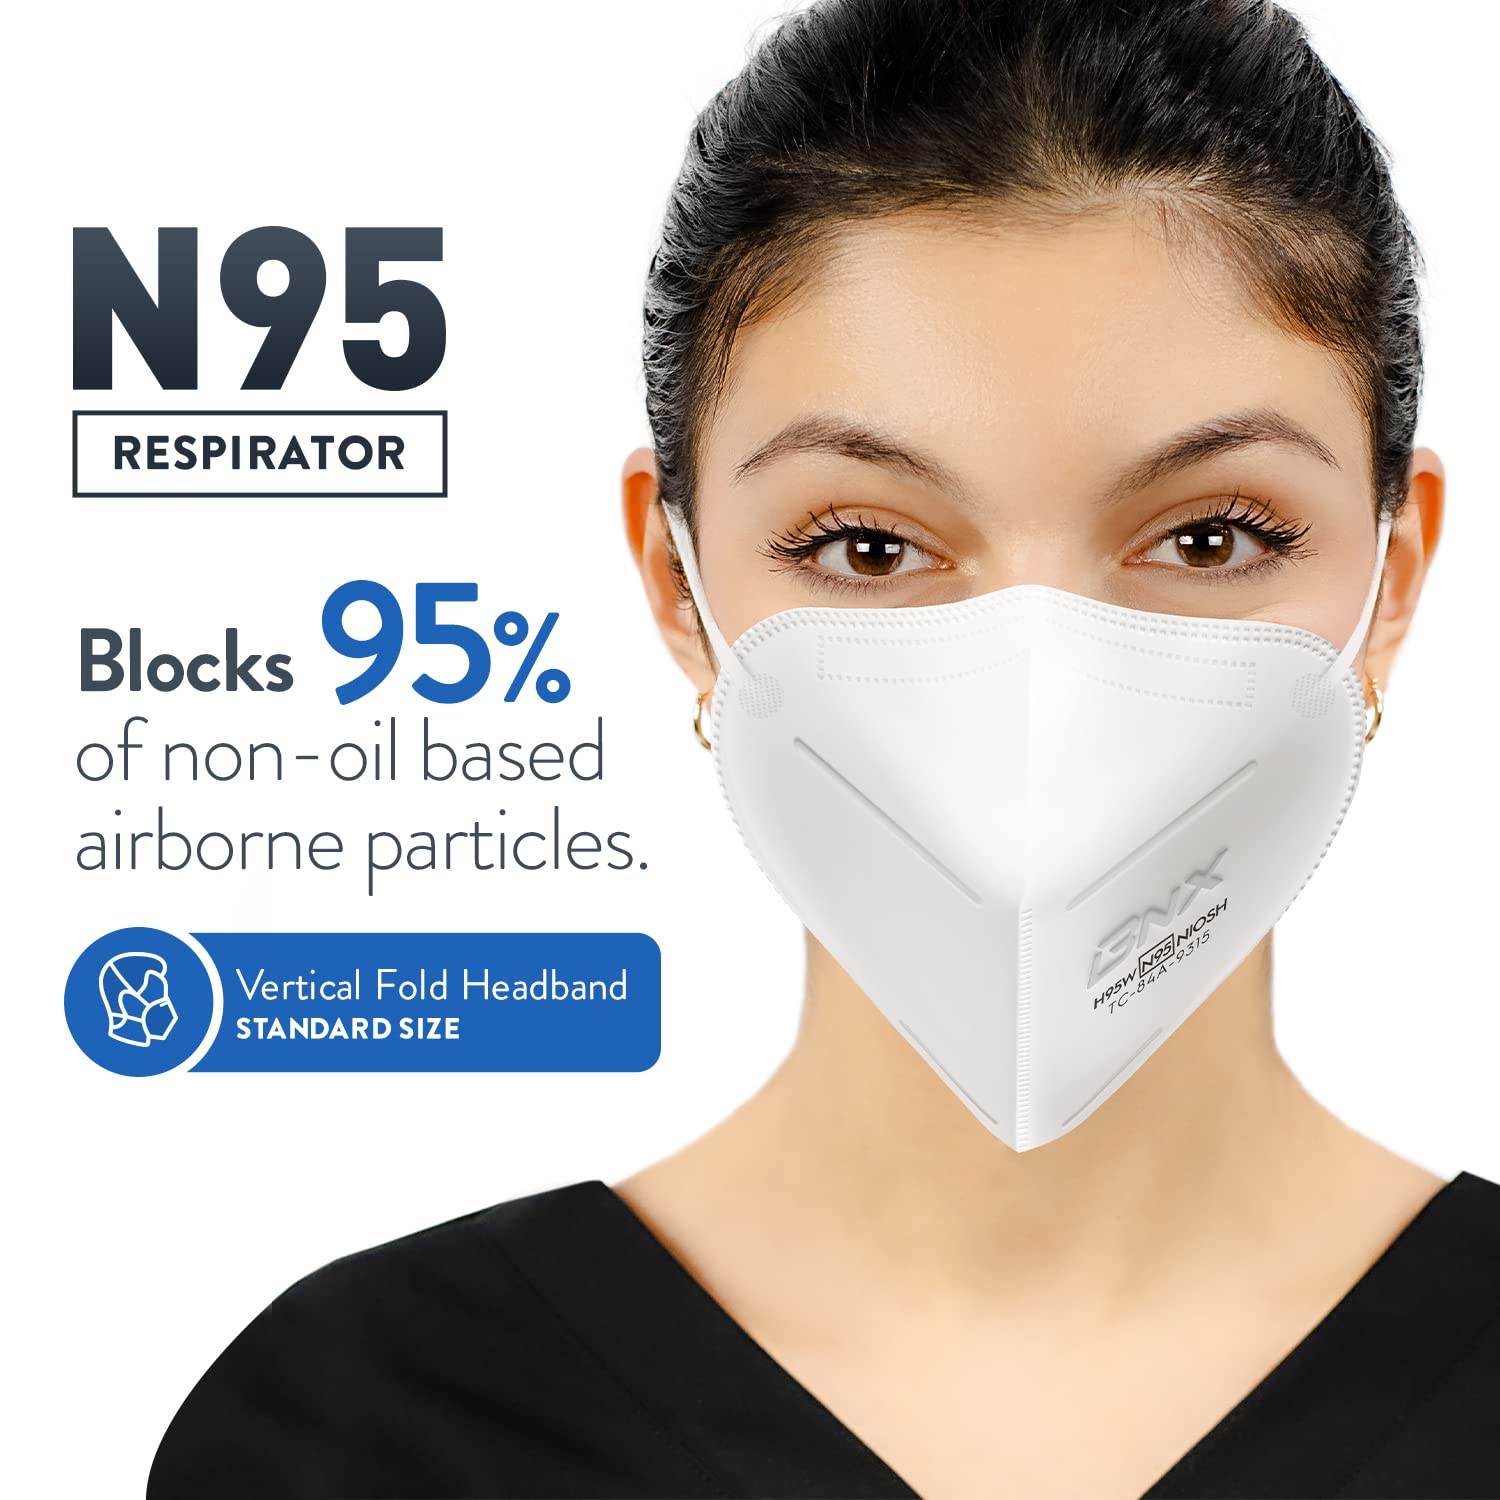 BNX N95 Mask NIOSH Certified MADE IN USA Particulate Respirator Protective Face Mask (10-Pack, Approval Number TC-84A-9315 / Model H95W) White